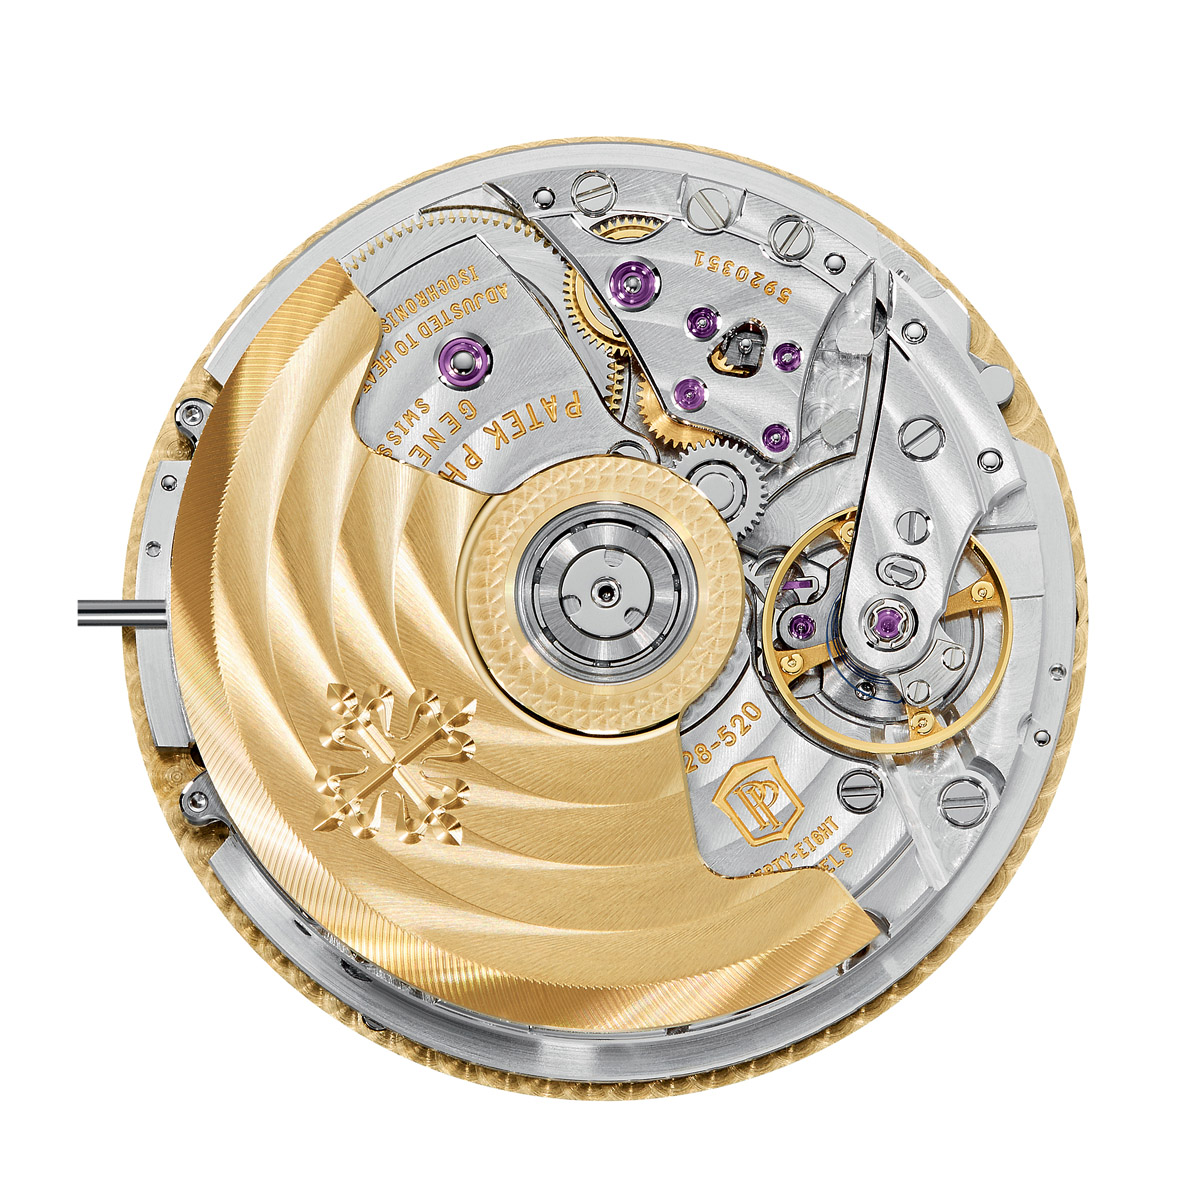 Patek_Philippe_World_Time_Chronograph_Ref. 5930_movement - ESCAPEMENT Magazine - watch replica reviews by Angus Davies